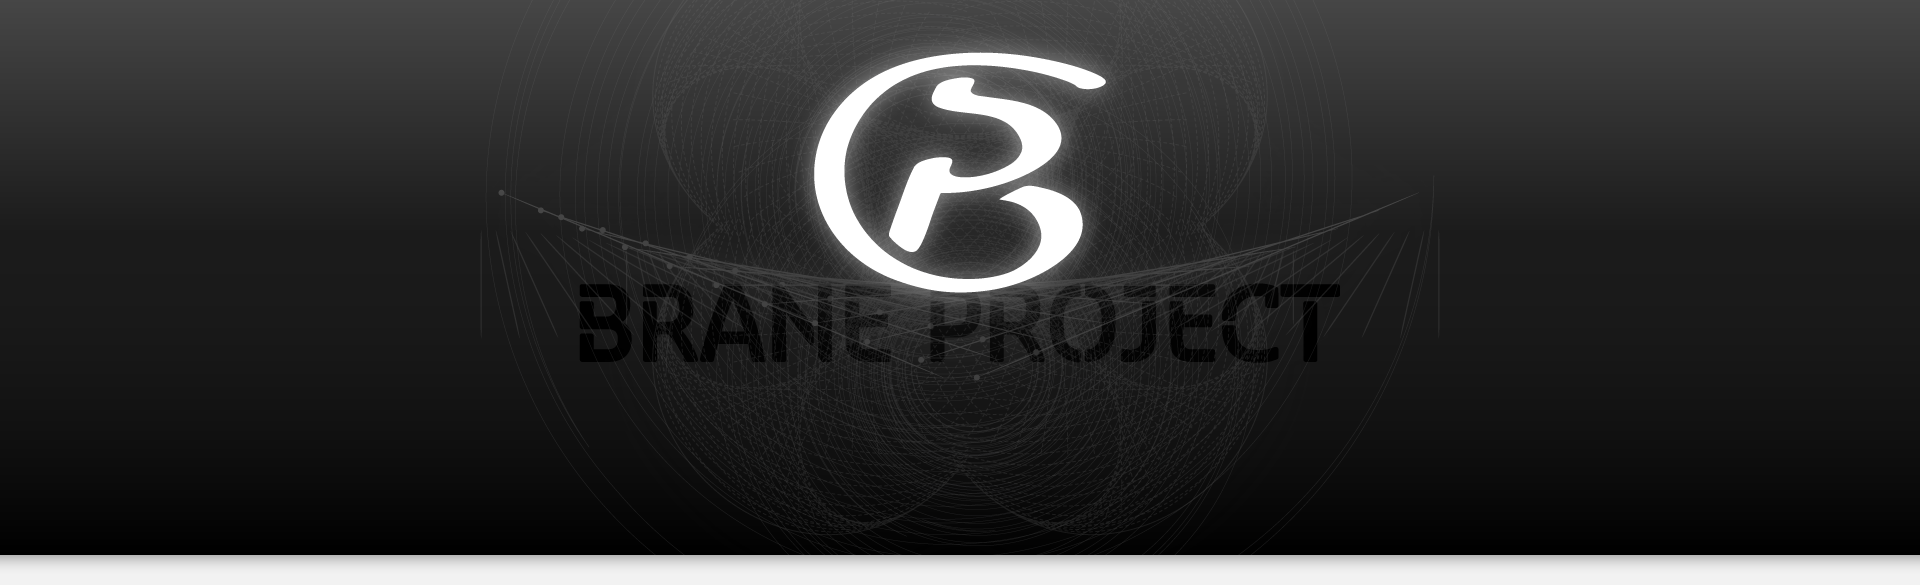 http://www.braneproject.com/templates/braneproject_accueil/images/header1920.png